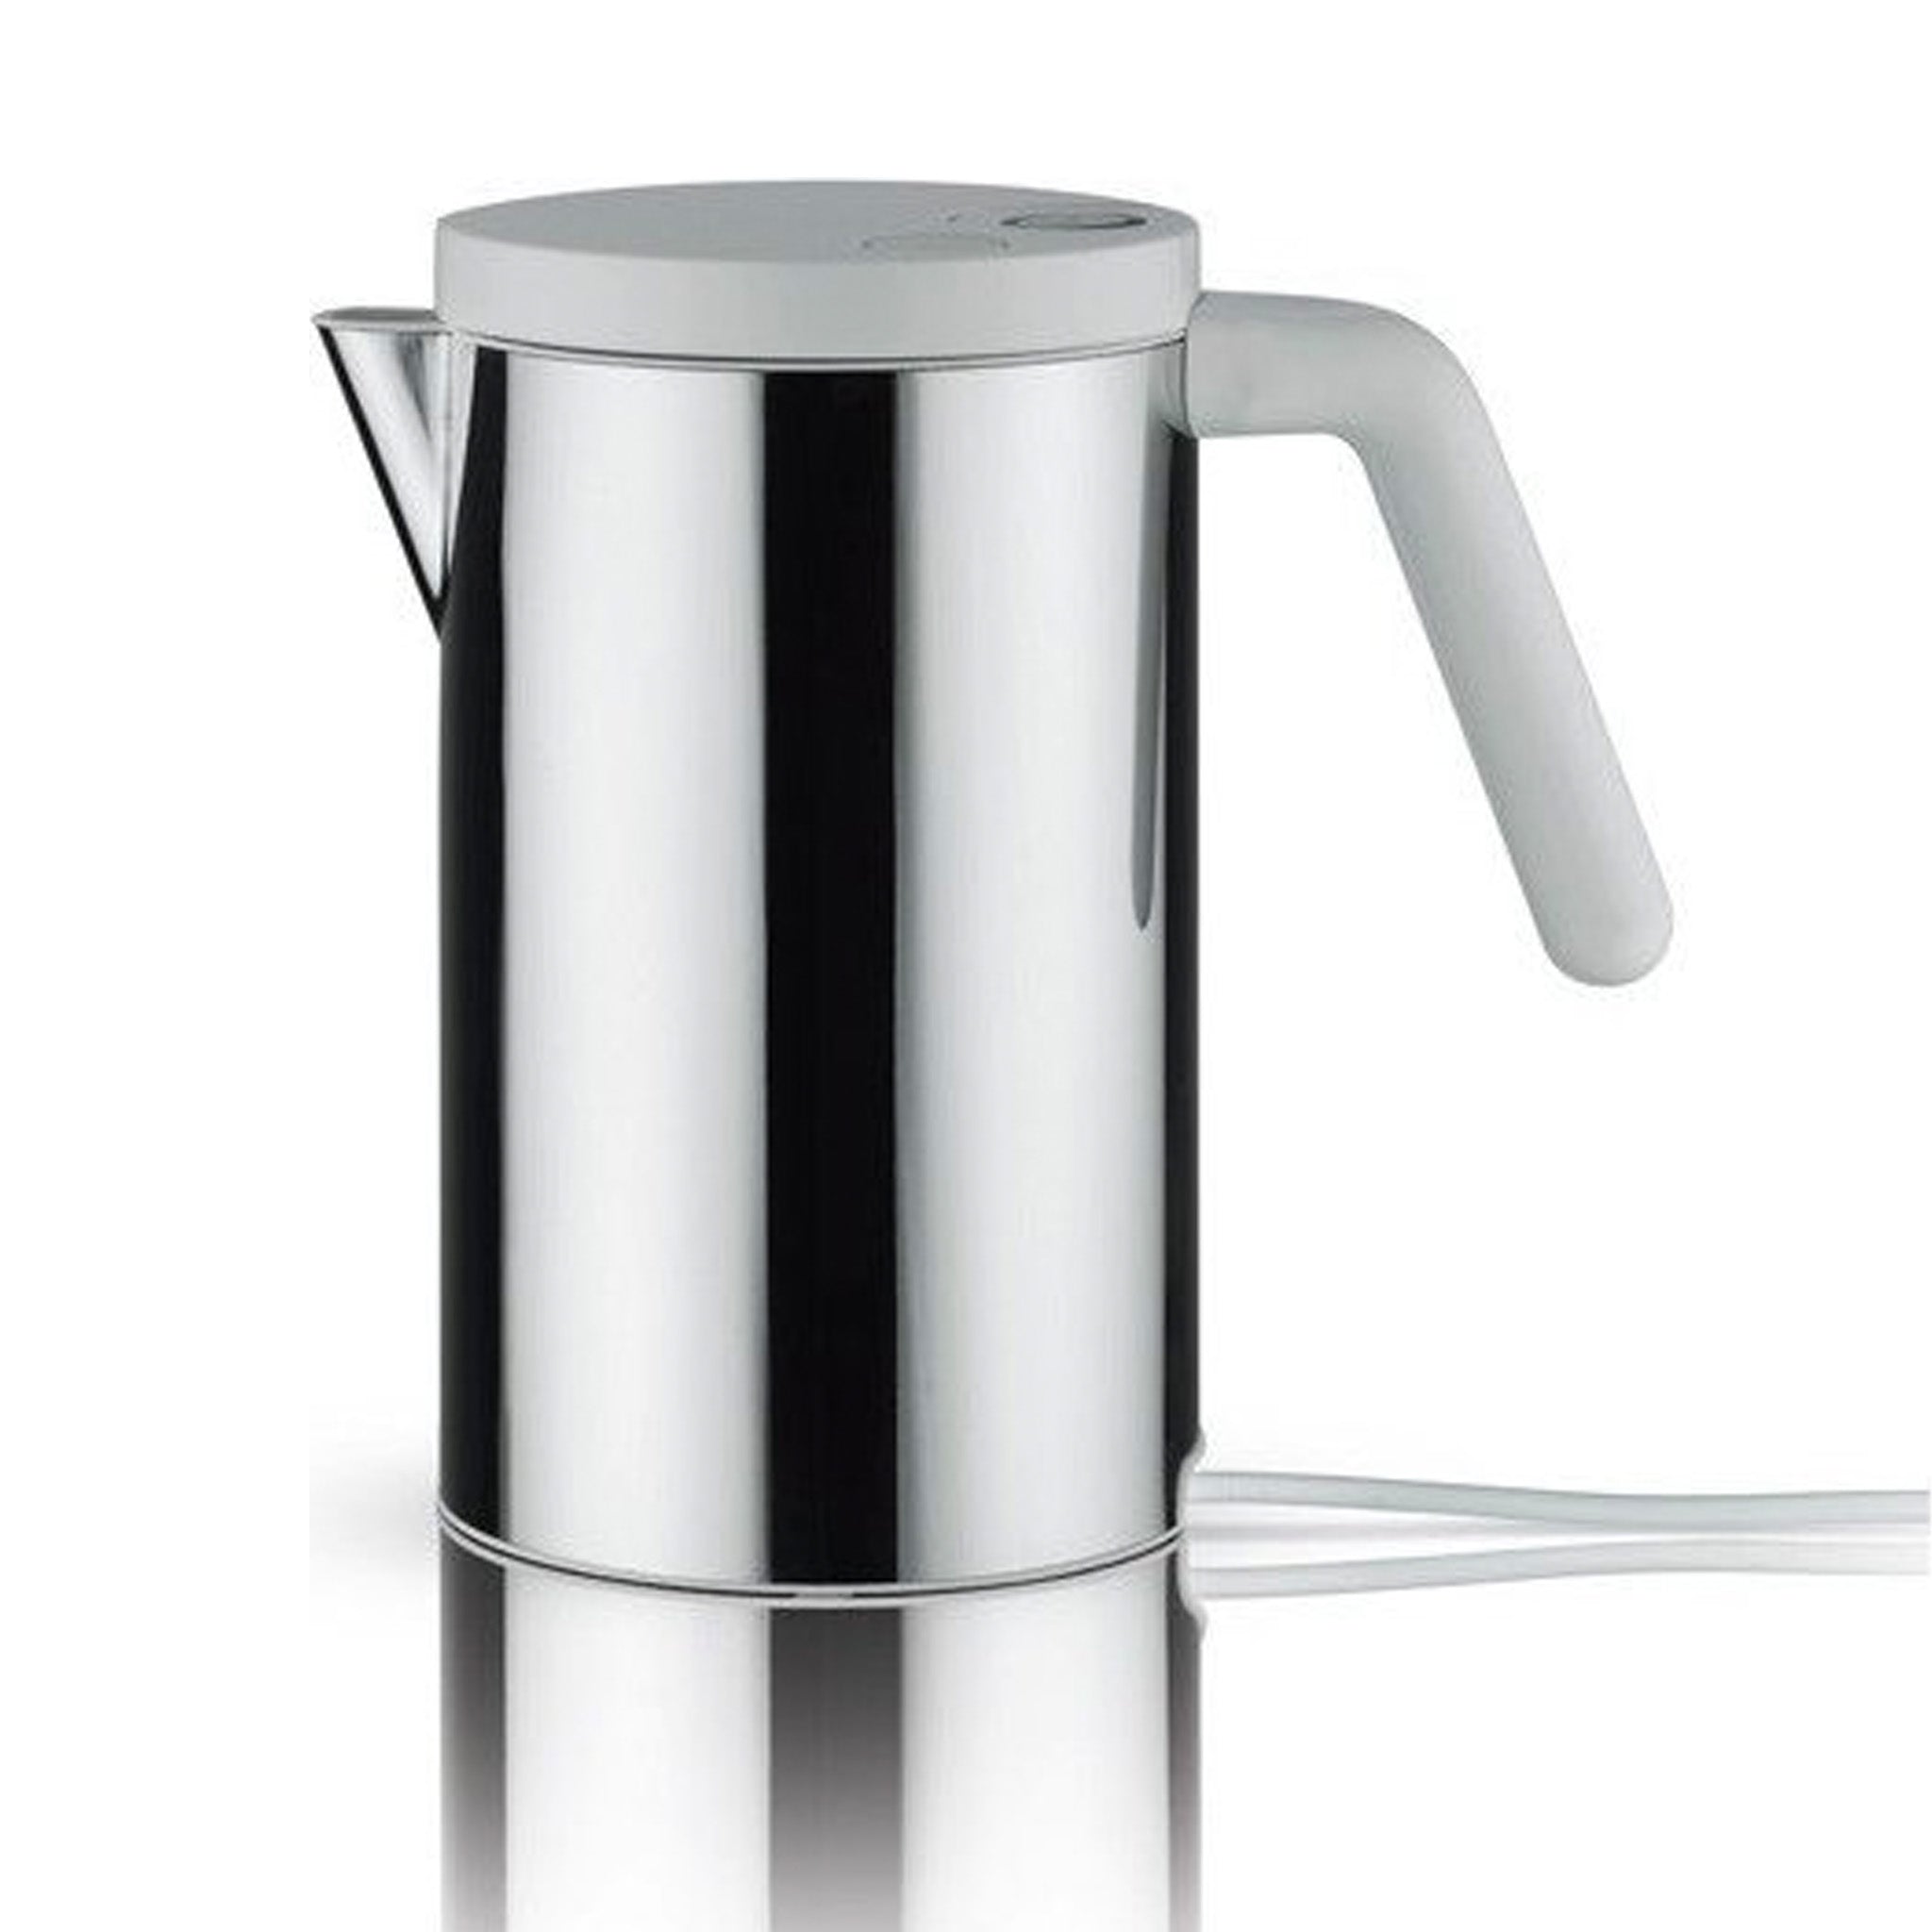 80cl Hot It Kettle in Stainless Steel / White by Alessi